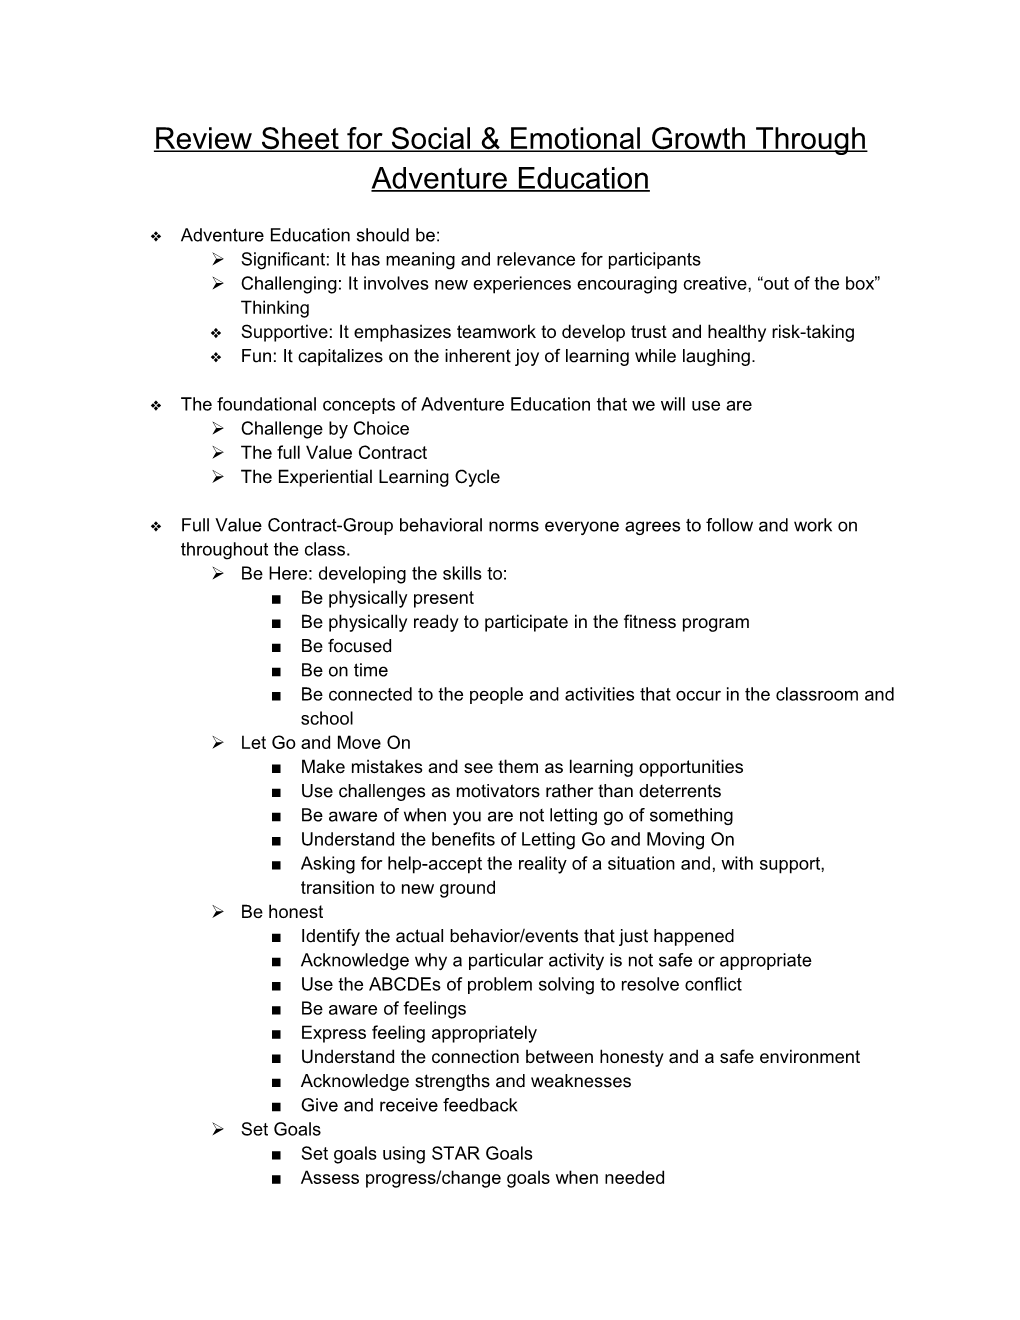 Review Sheet for Social & Emotional Growth Through Adventure Education